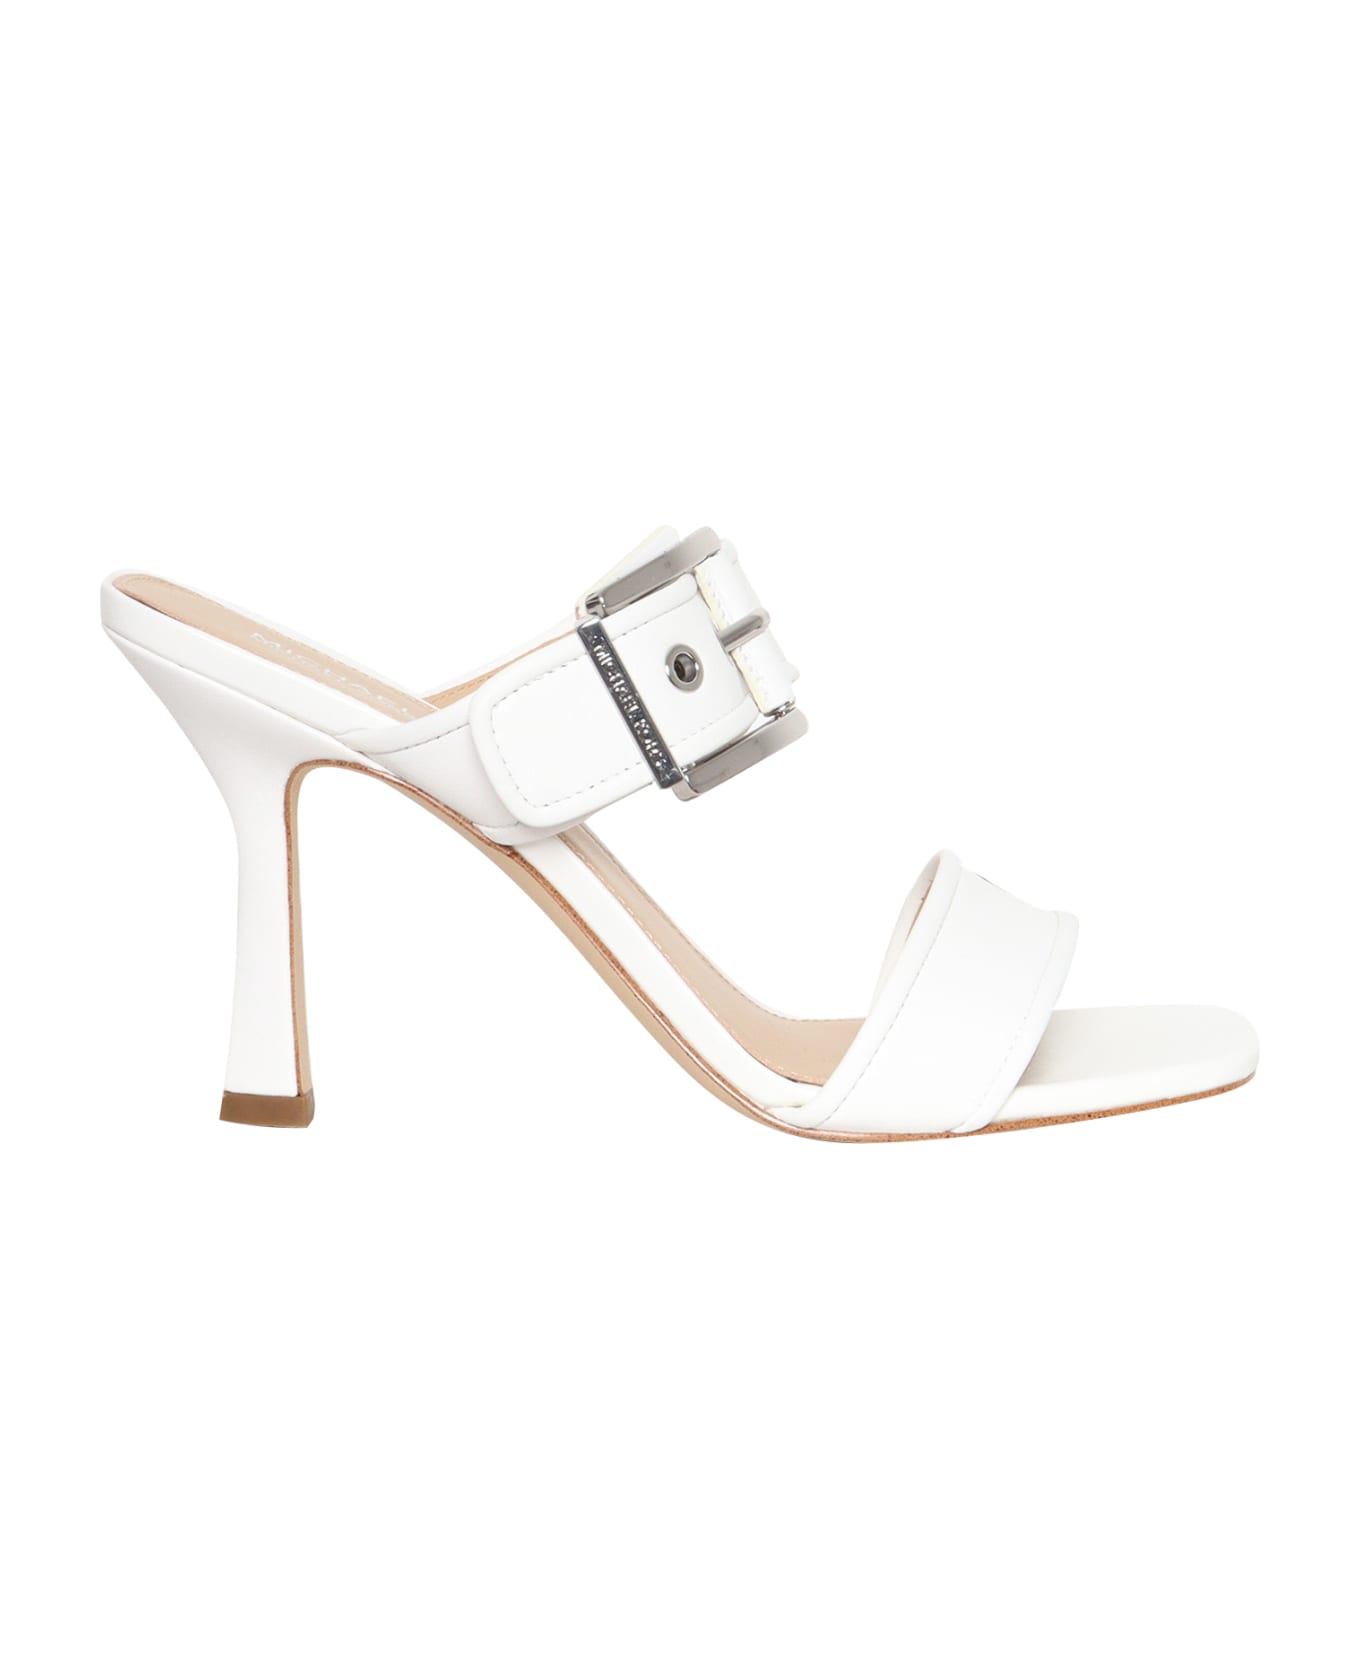 Michael Kors Colby Leather Sandals - WHITE サンダル